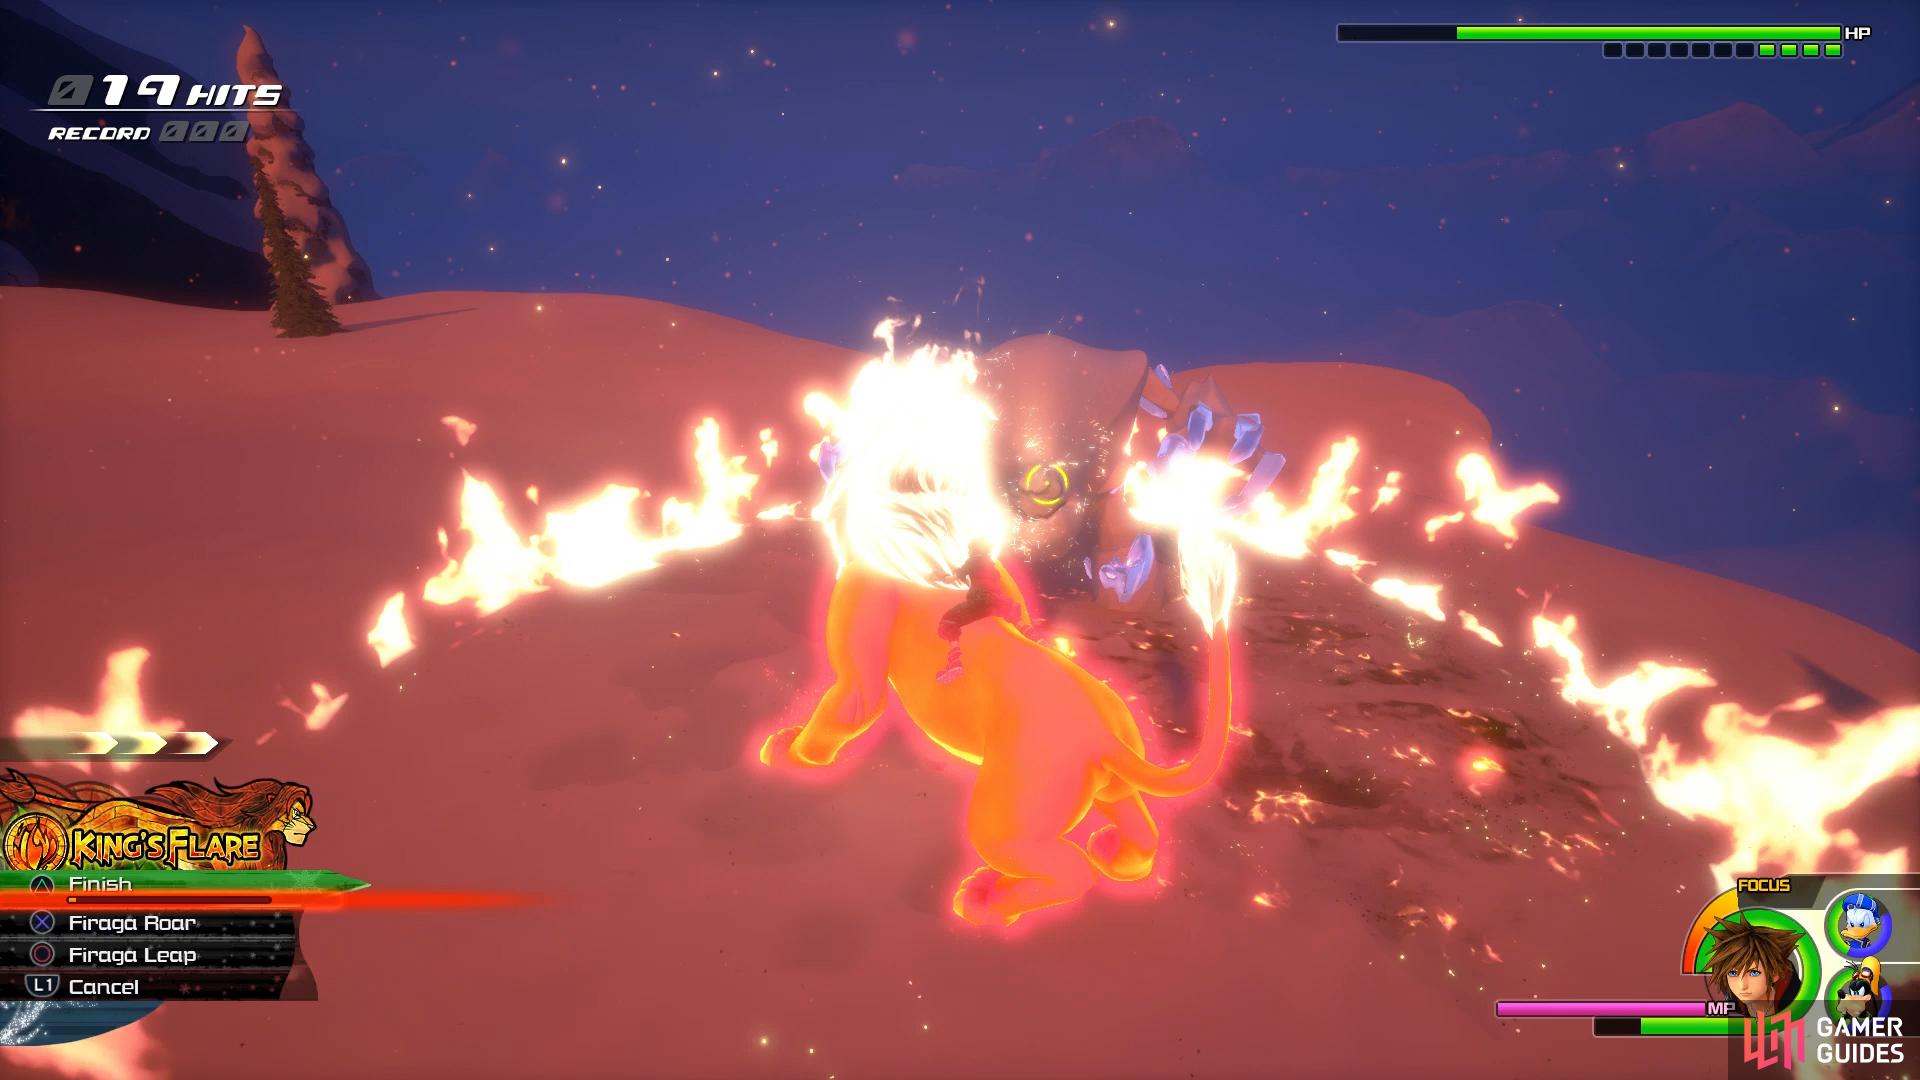 King's Flare is extremely potent against Marshmallow.